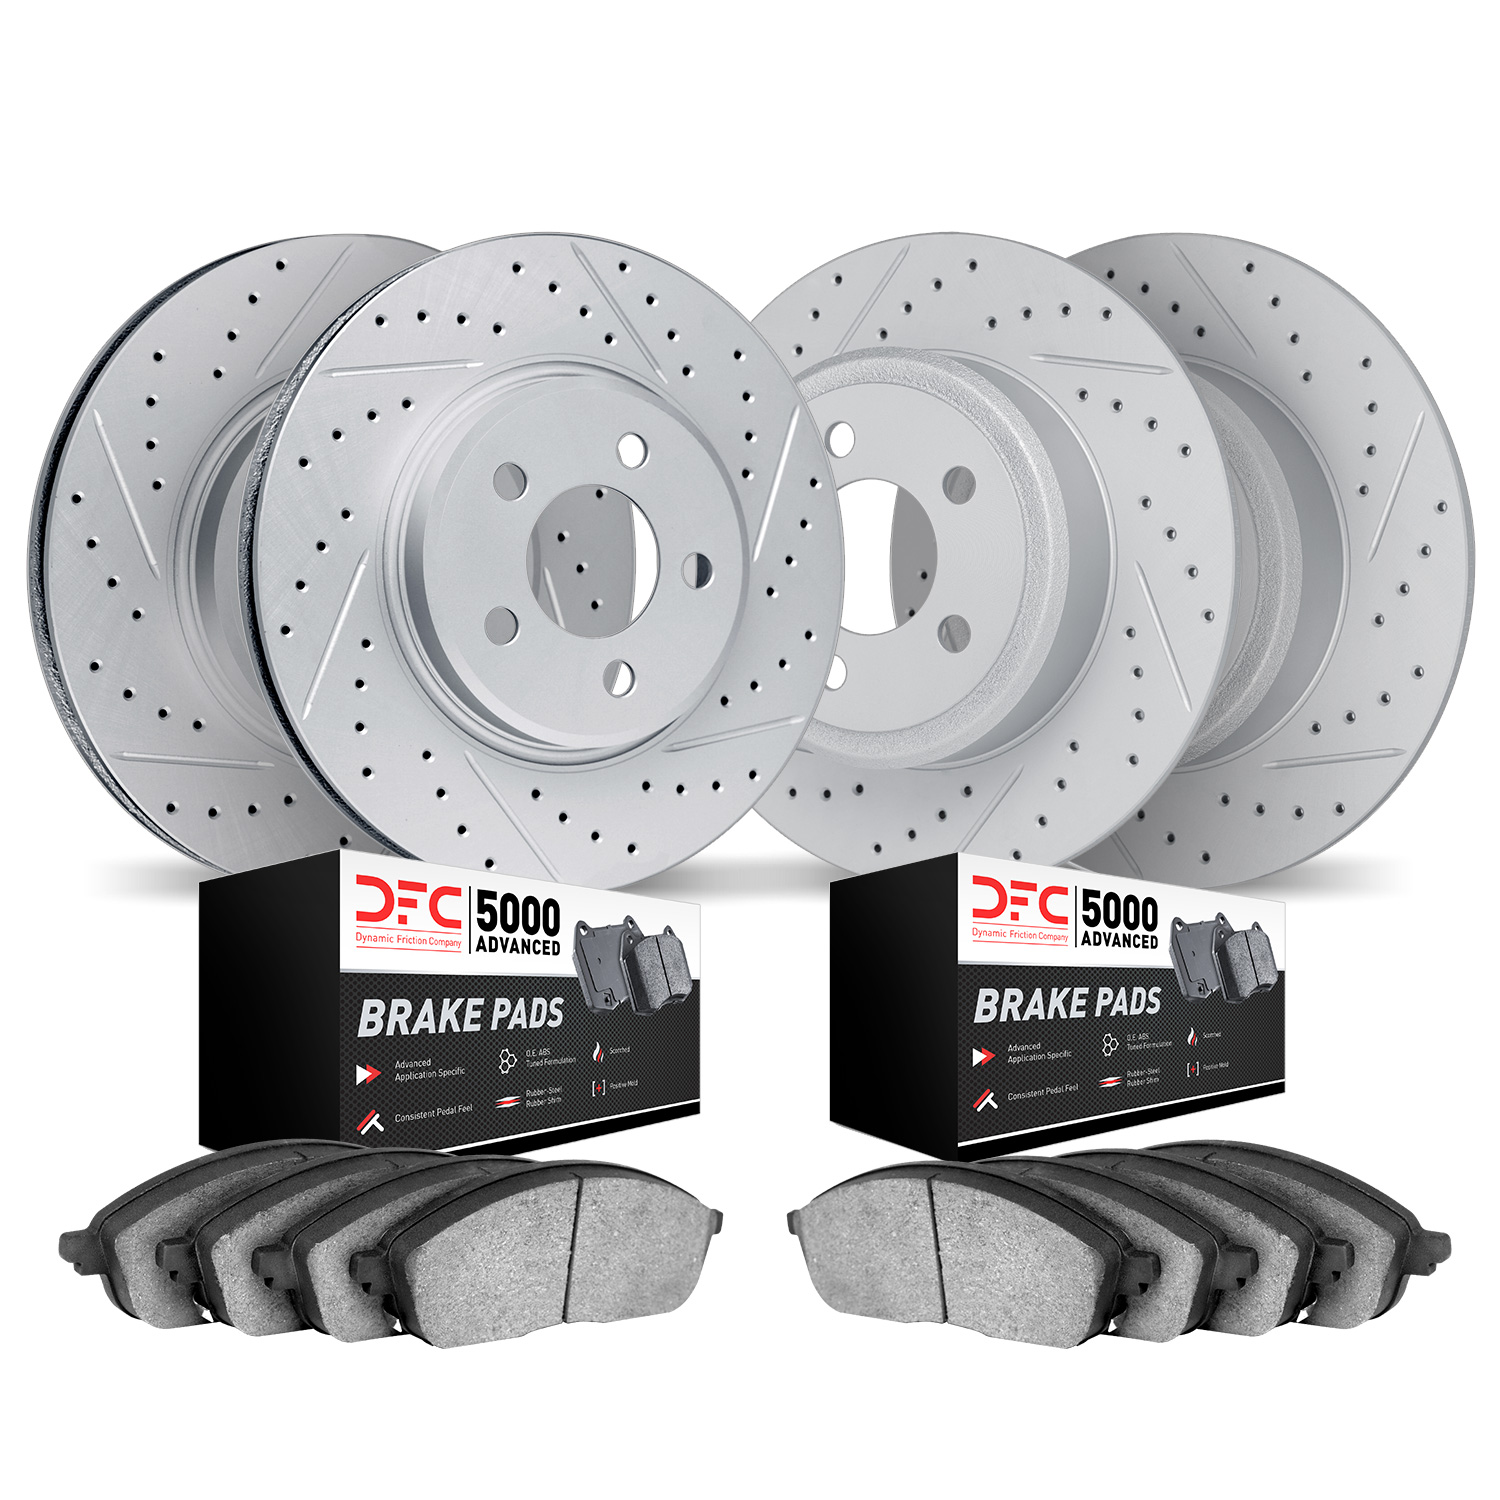 2504-54205 Geoperformance Drilled/Slotted Rotors w/5000 Advanced Brake Pads Kit, 2006-2013 Ford/Lincoln/Mercury/Mazda, Position: